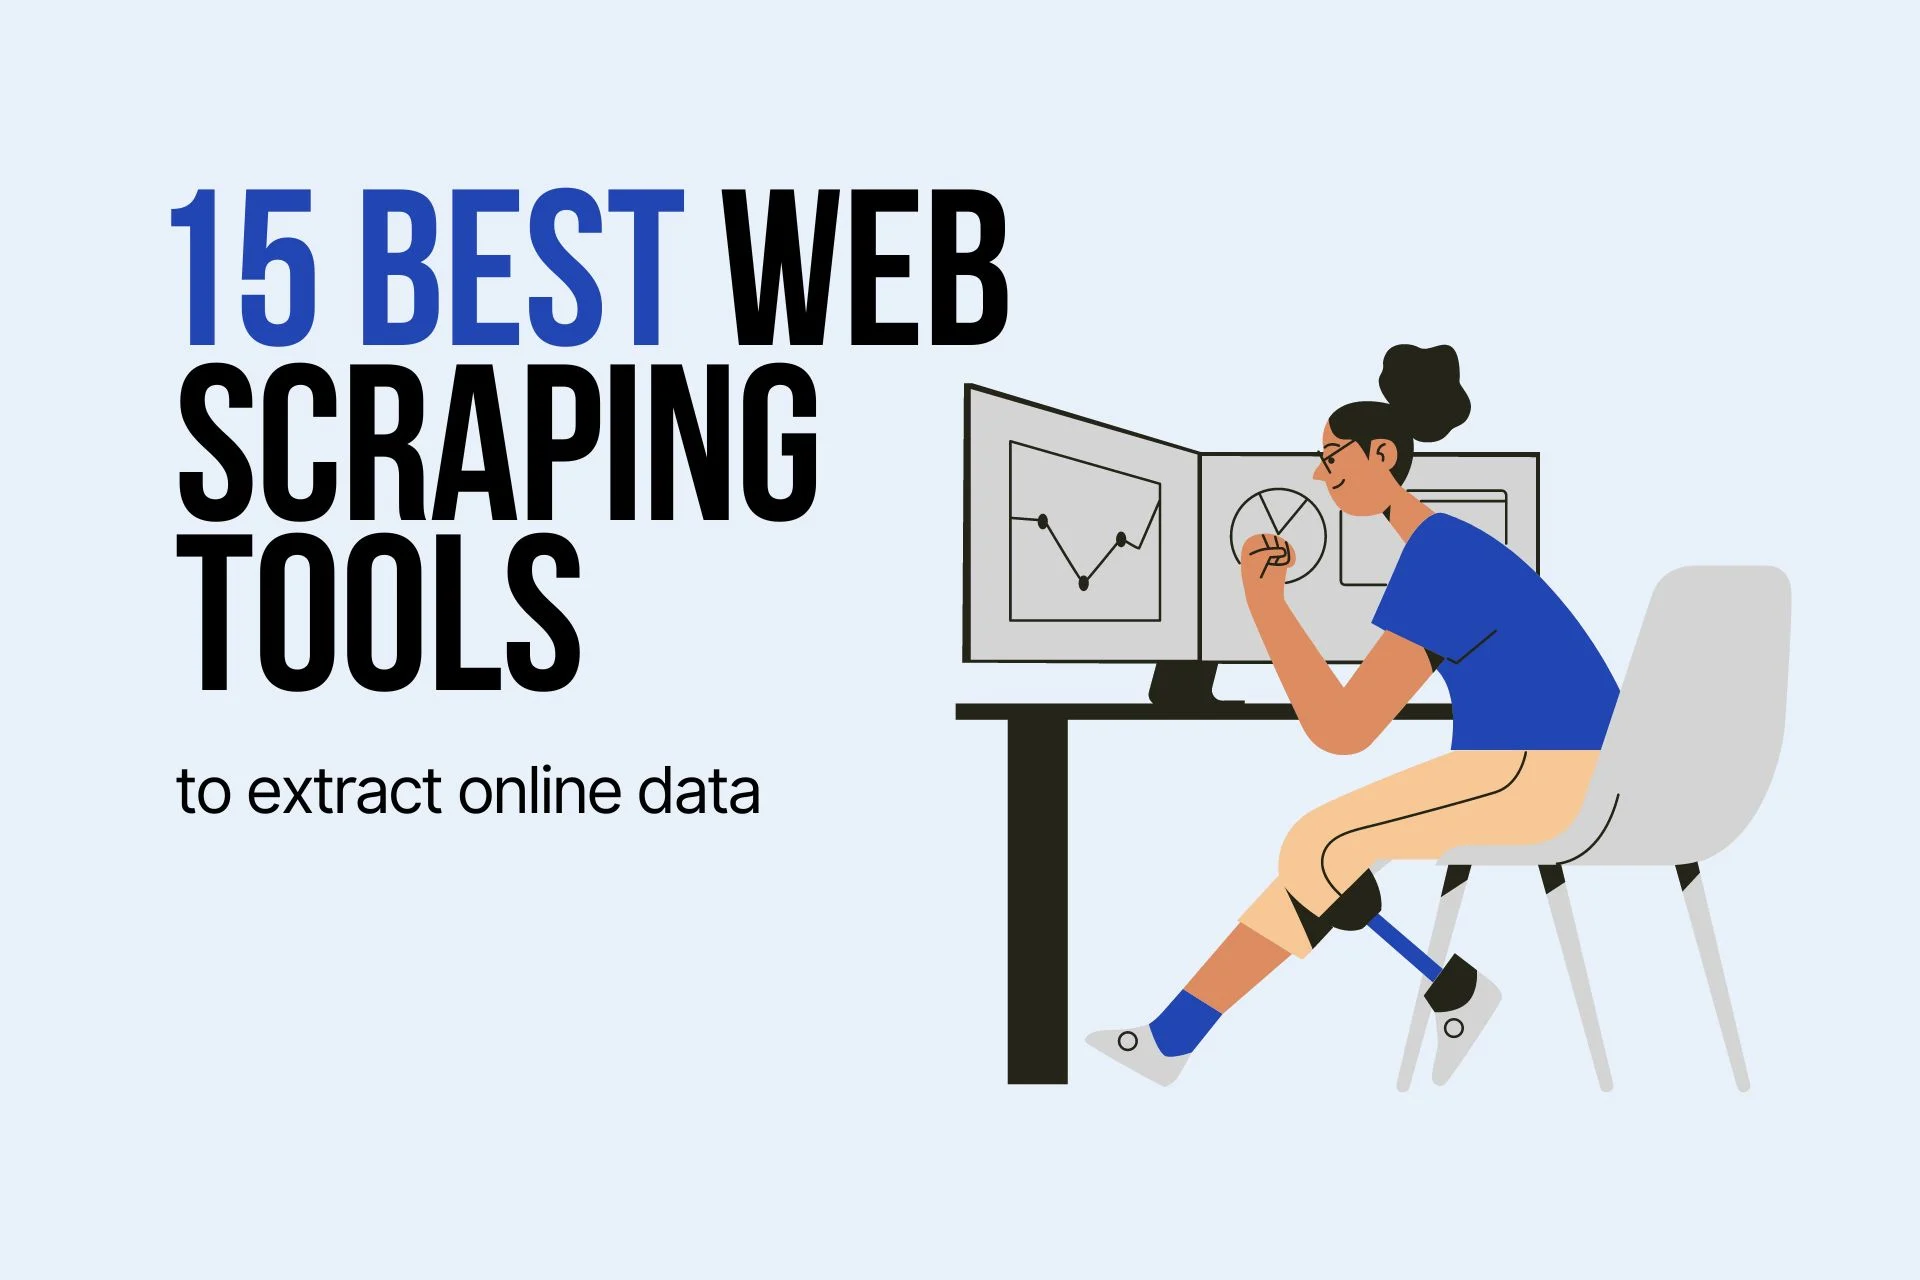 15 Best Web Scraping Tools to Extract Online Data